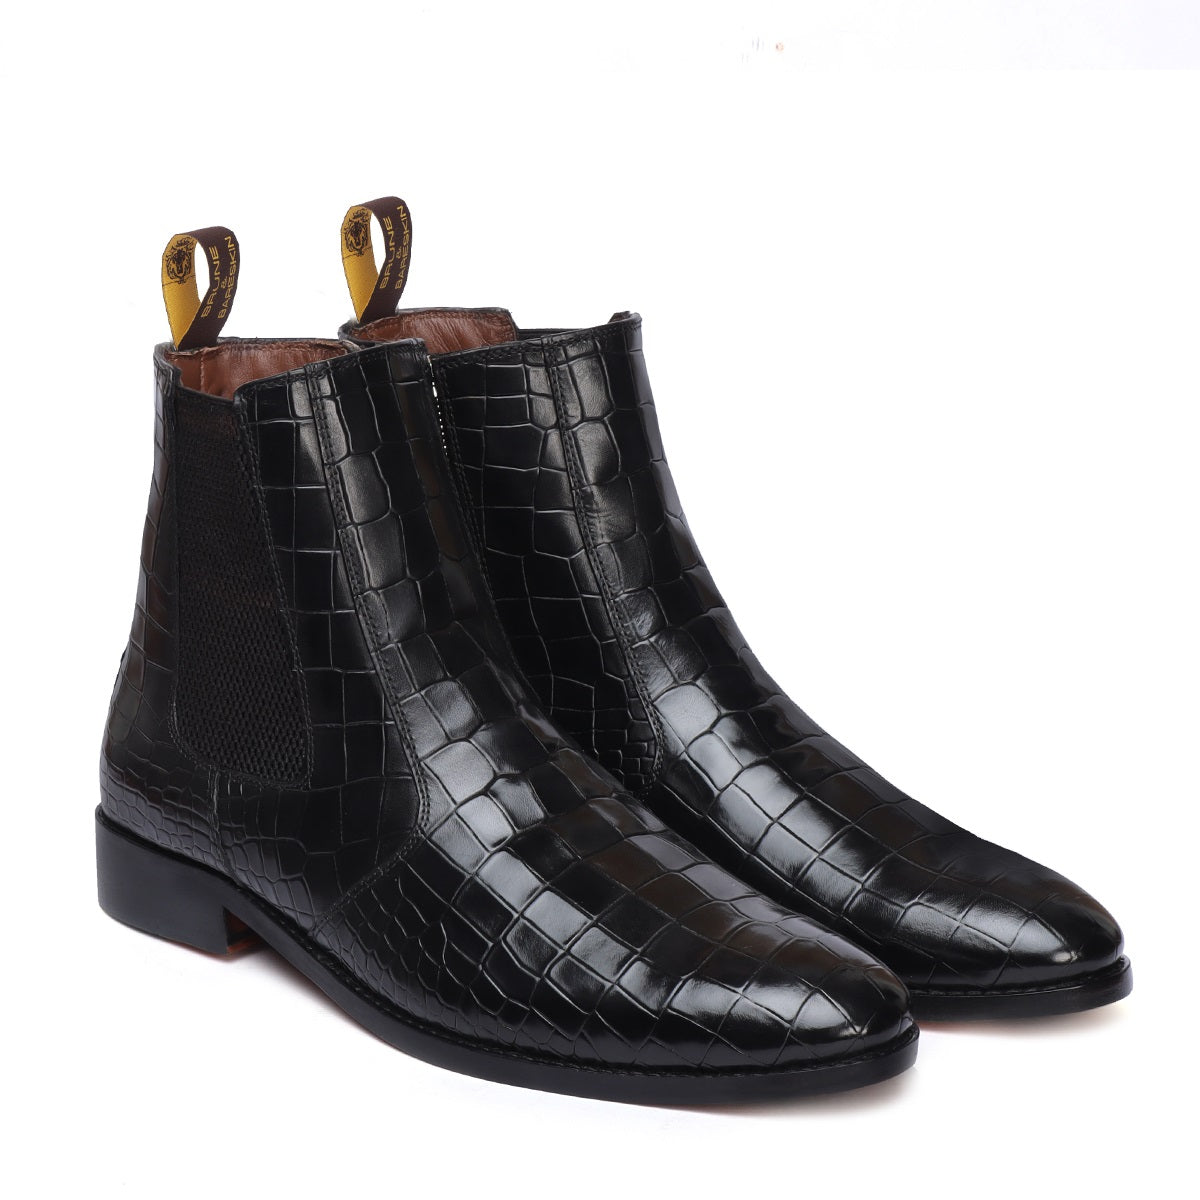 Black Deep Cut Croco Leather Chelsea Boots with Zip Closure For Men By Brune & Bareskin